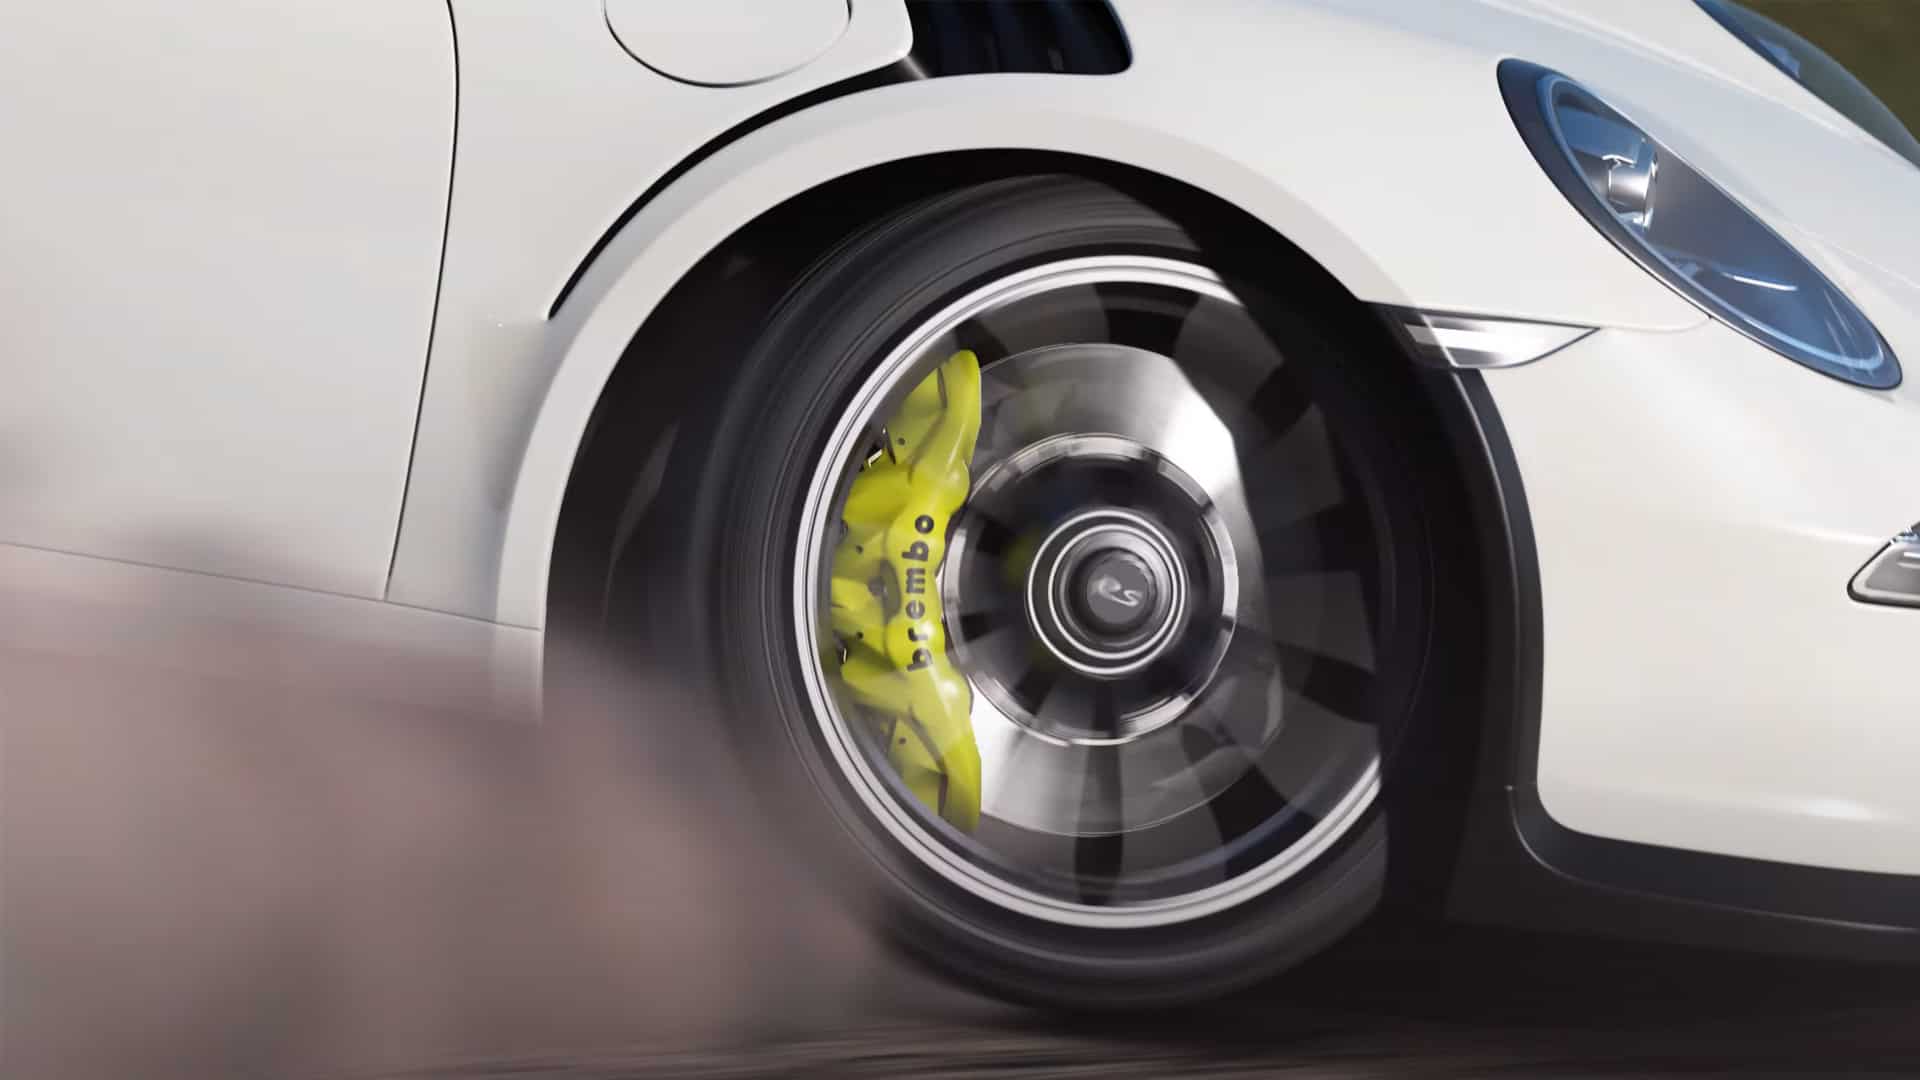 New Gran Turismo 7 tuning options revealed in Brembo partnership announcement